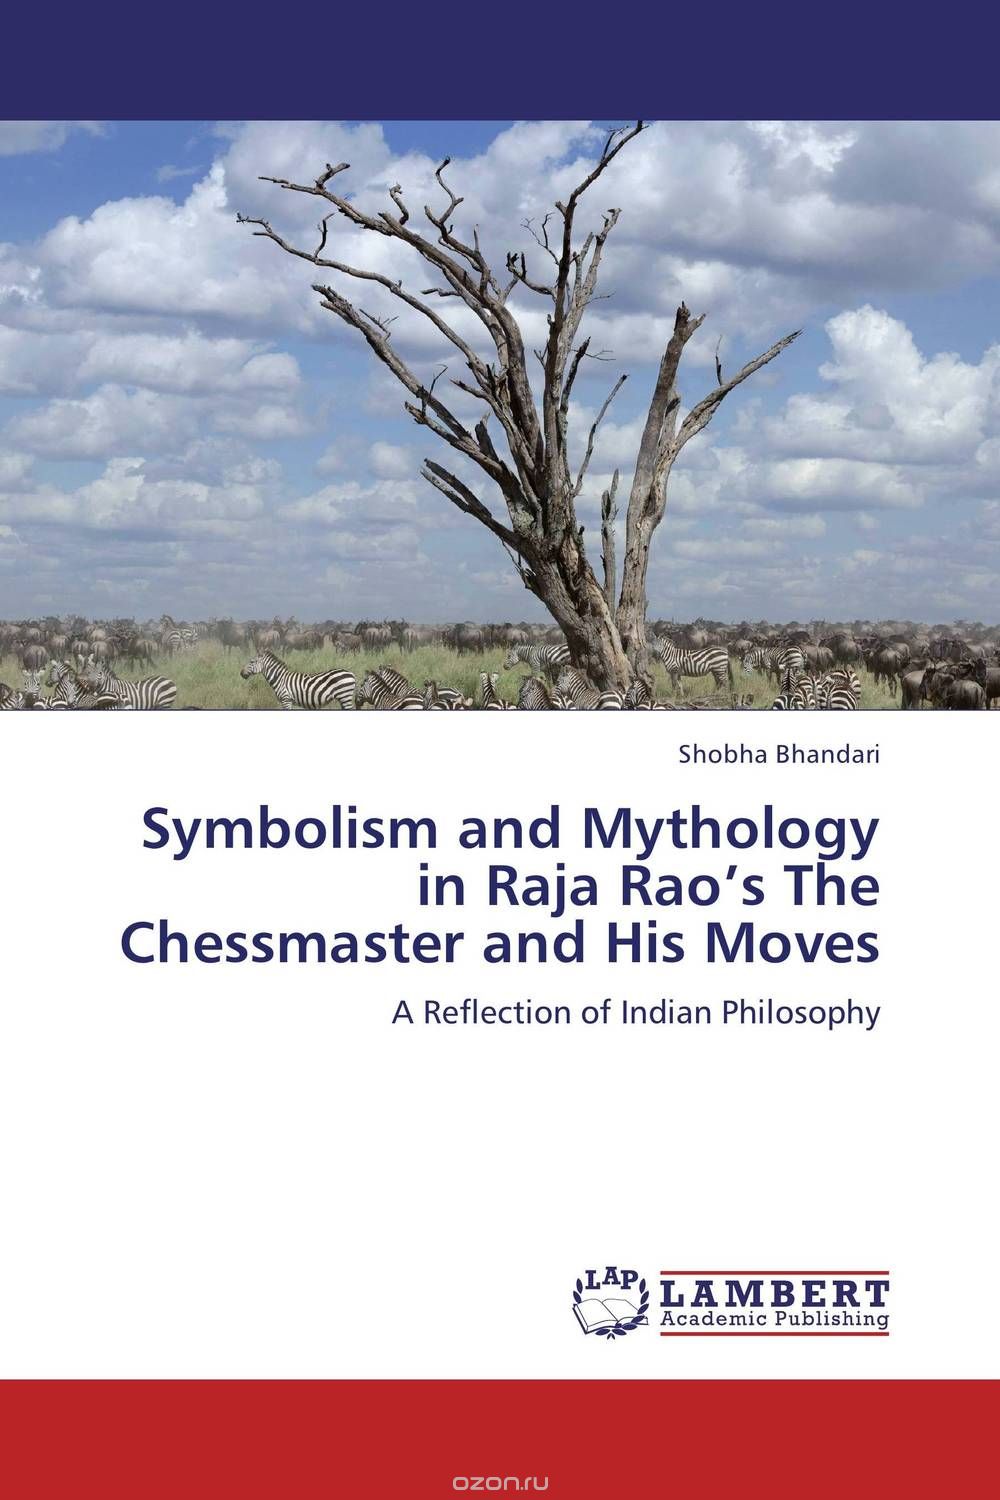 Symbolism and Mythology in Raja Rao’s The Chessmaster and His Moves